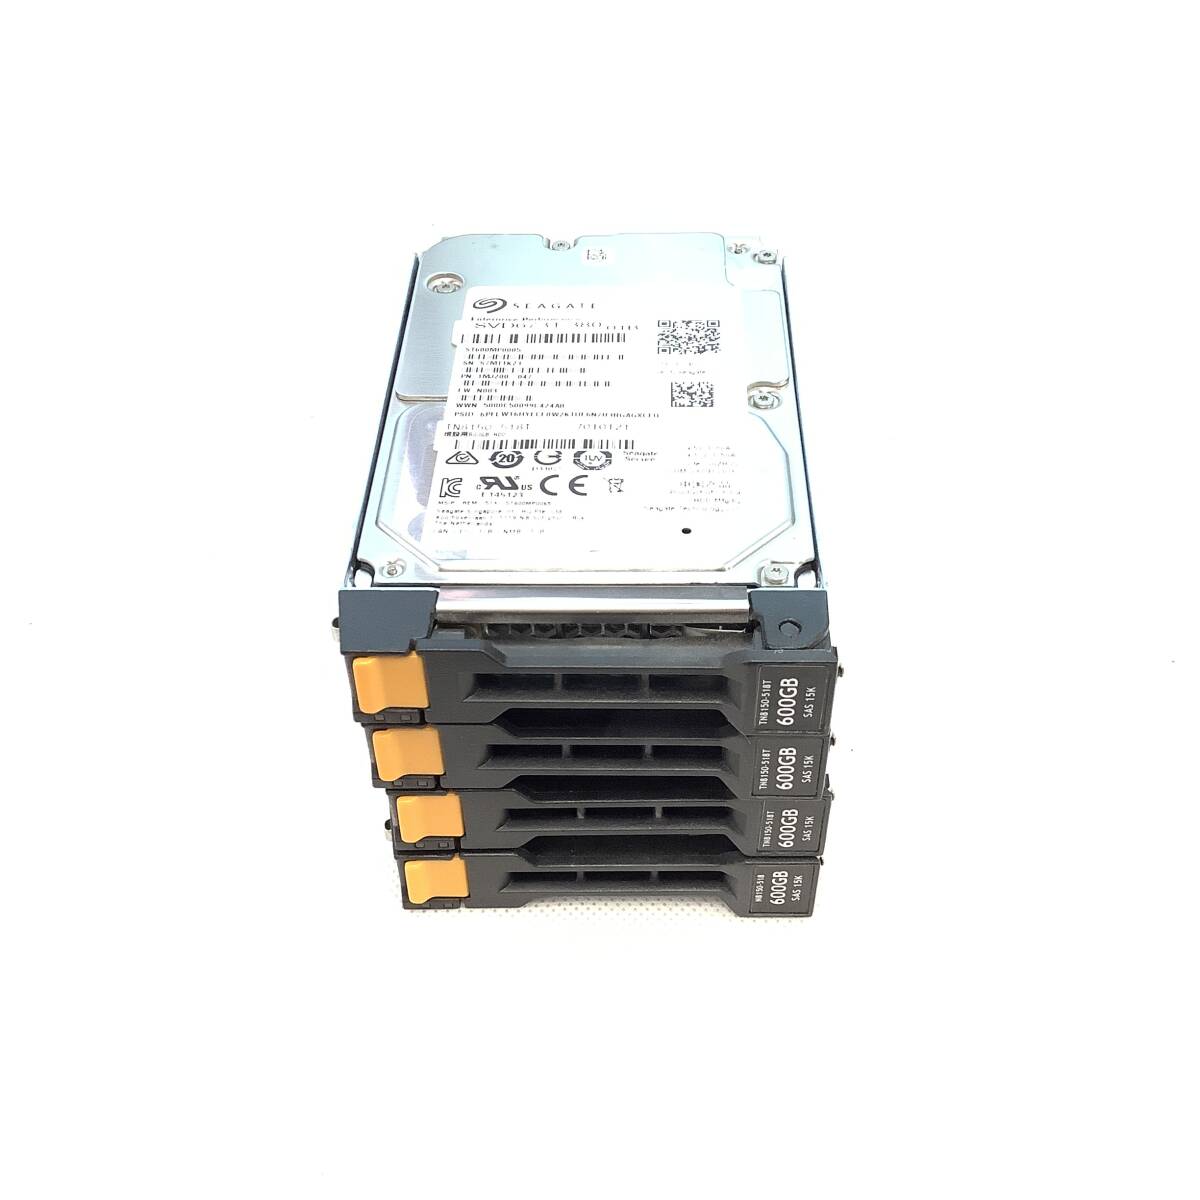 K6042475 SEAGATE 600GB SAS 15K 2.5 -inch NEC mounter HDD 4 point [ used operation goods ]